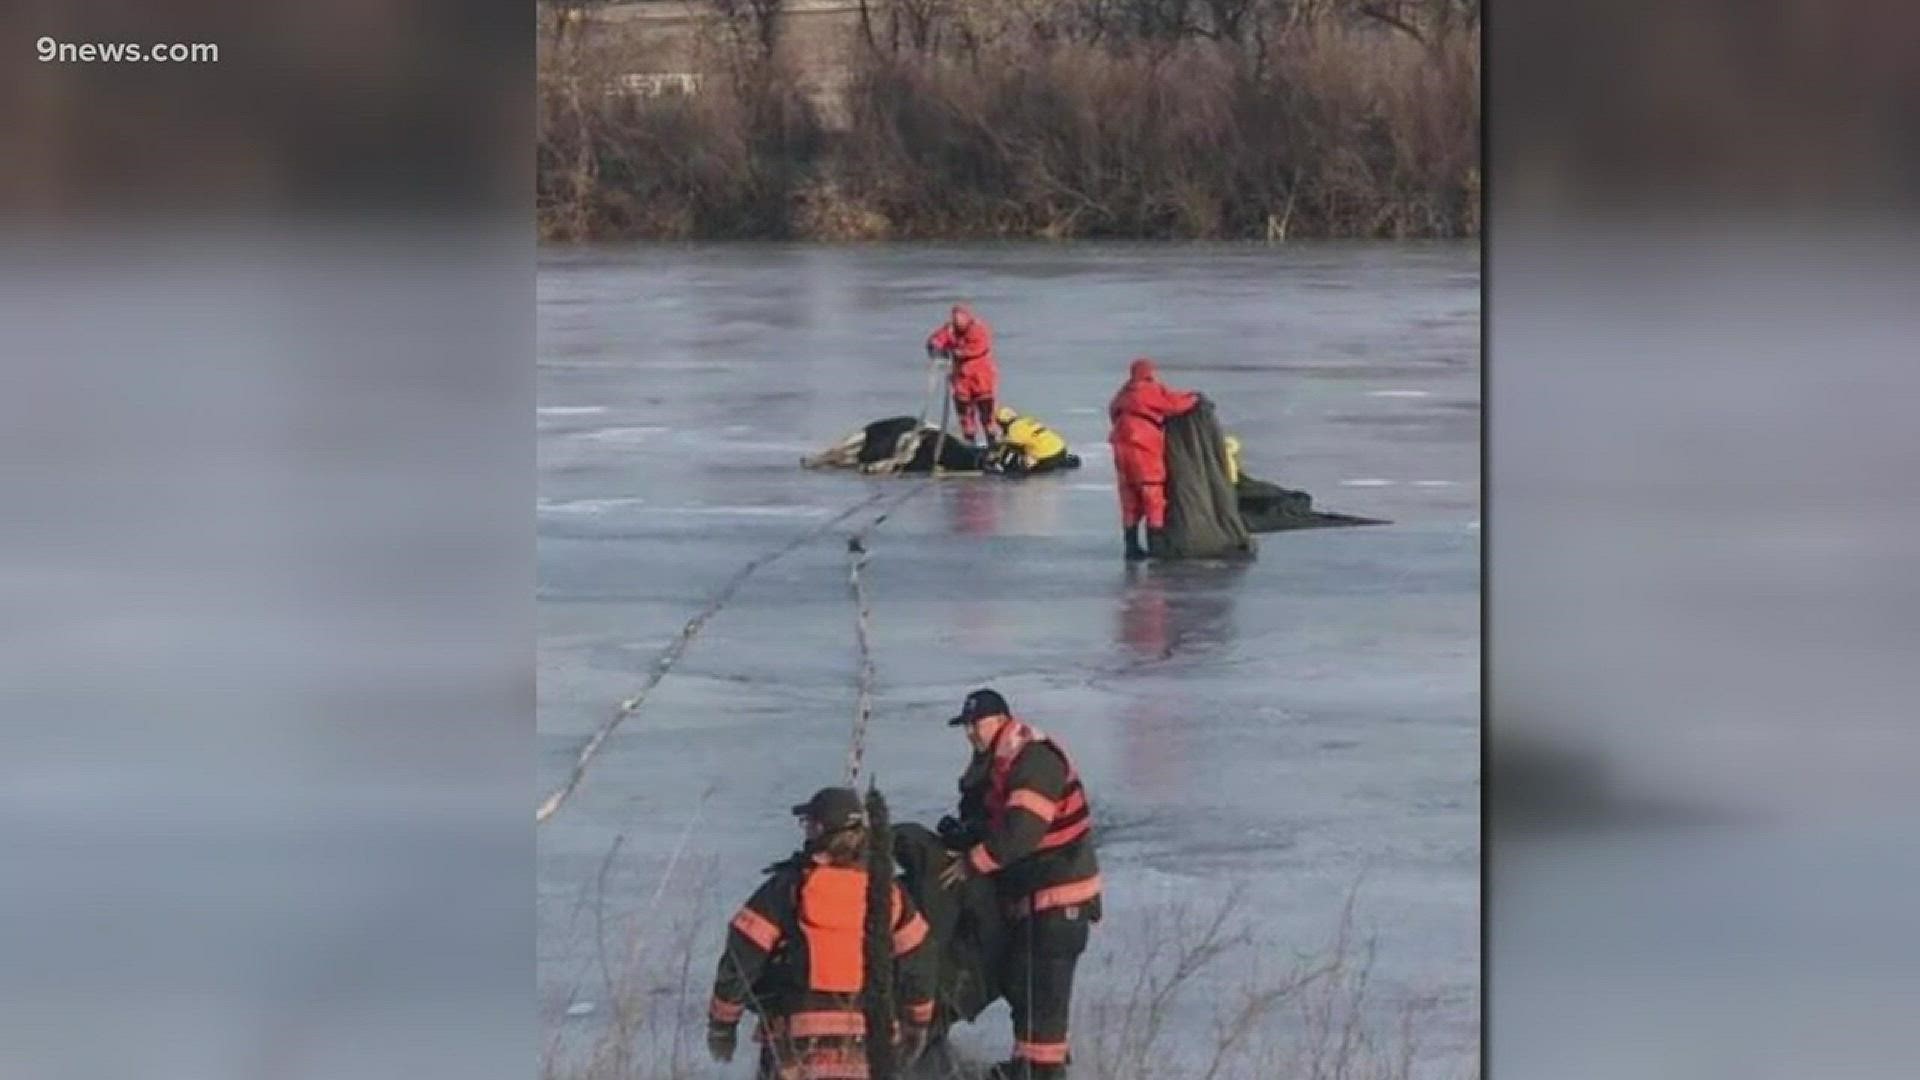 Nearly two dozen rescuers in Loveland worked together to save a horse stuck on an icy pond on Tuesday morning.